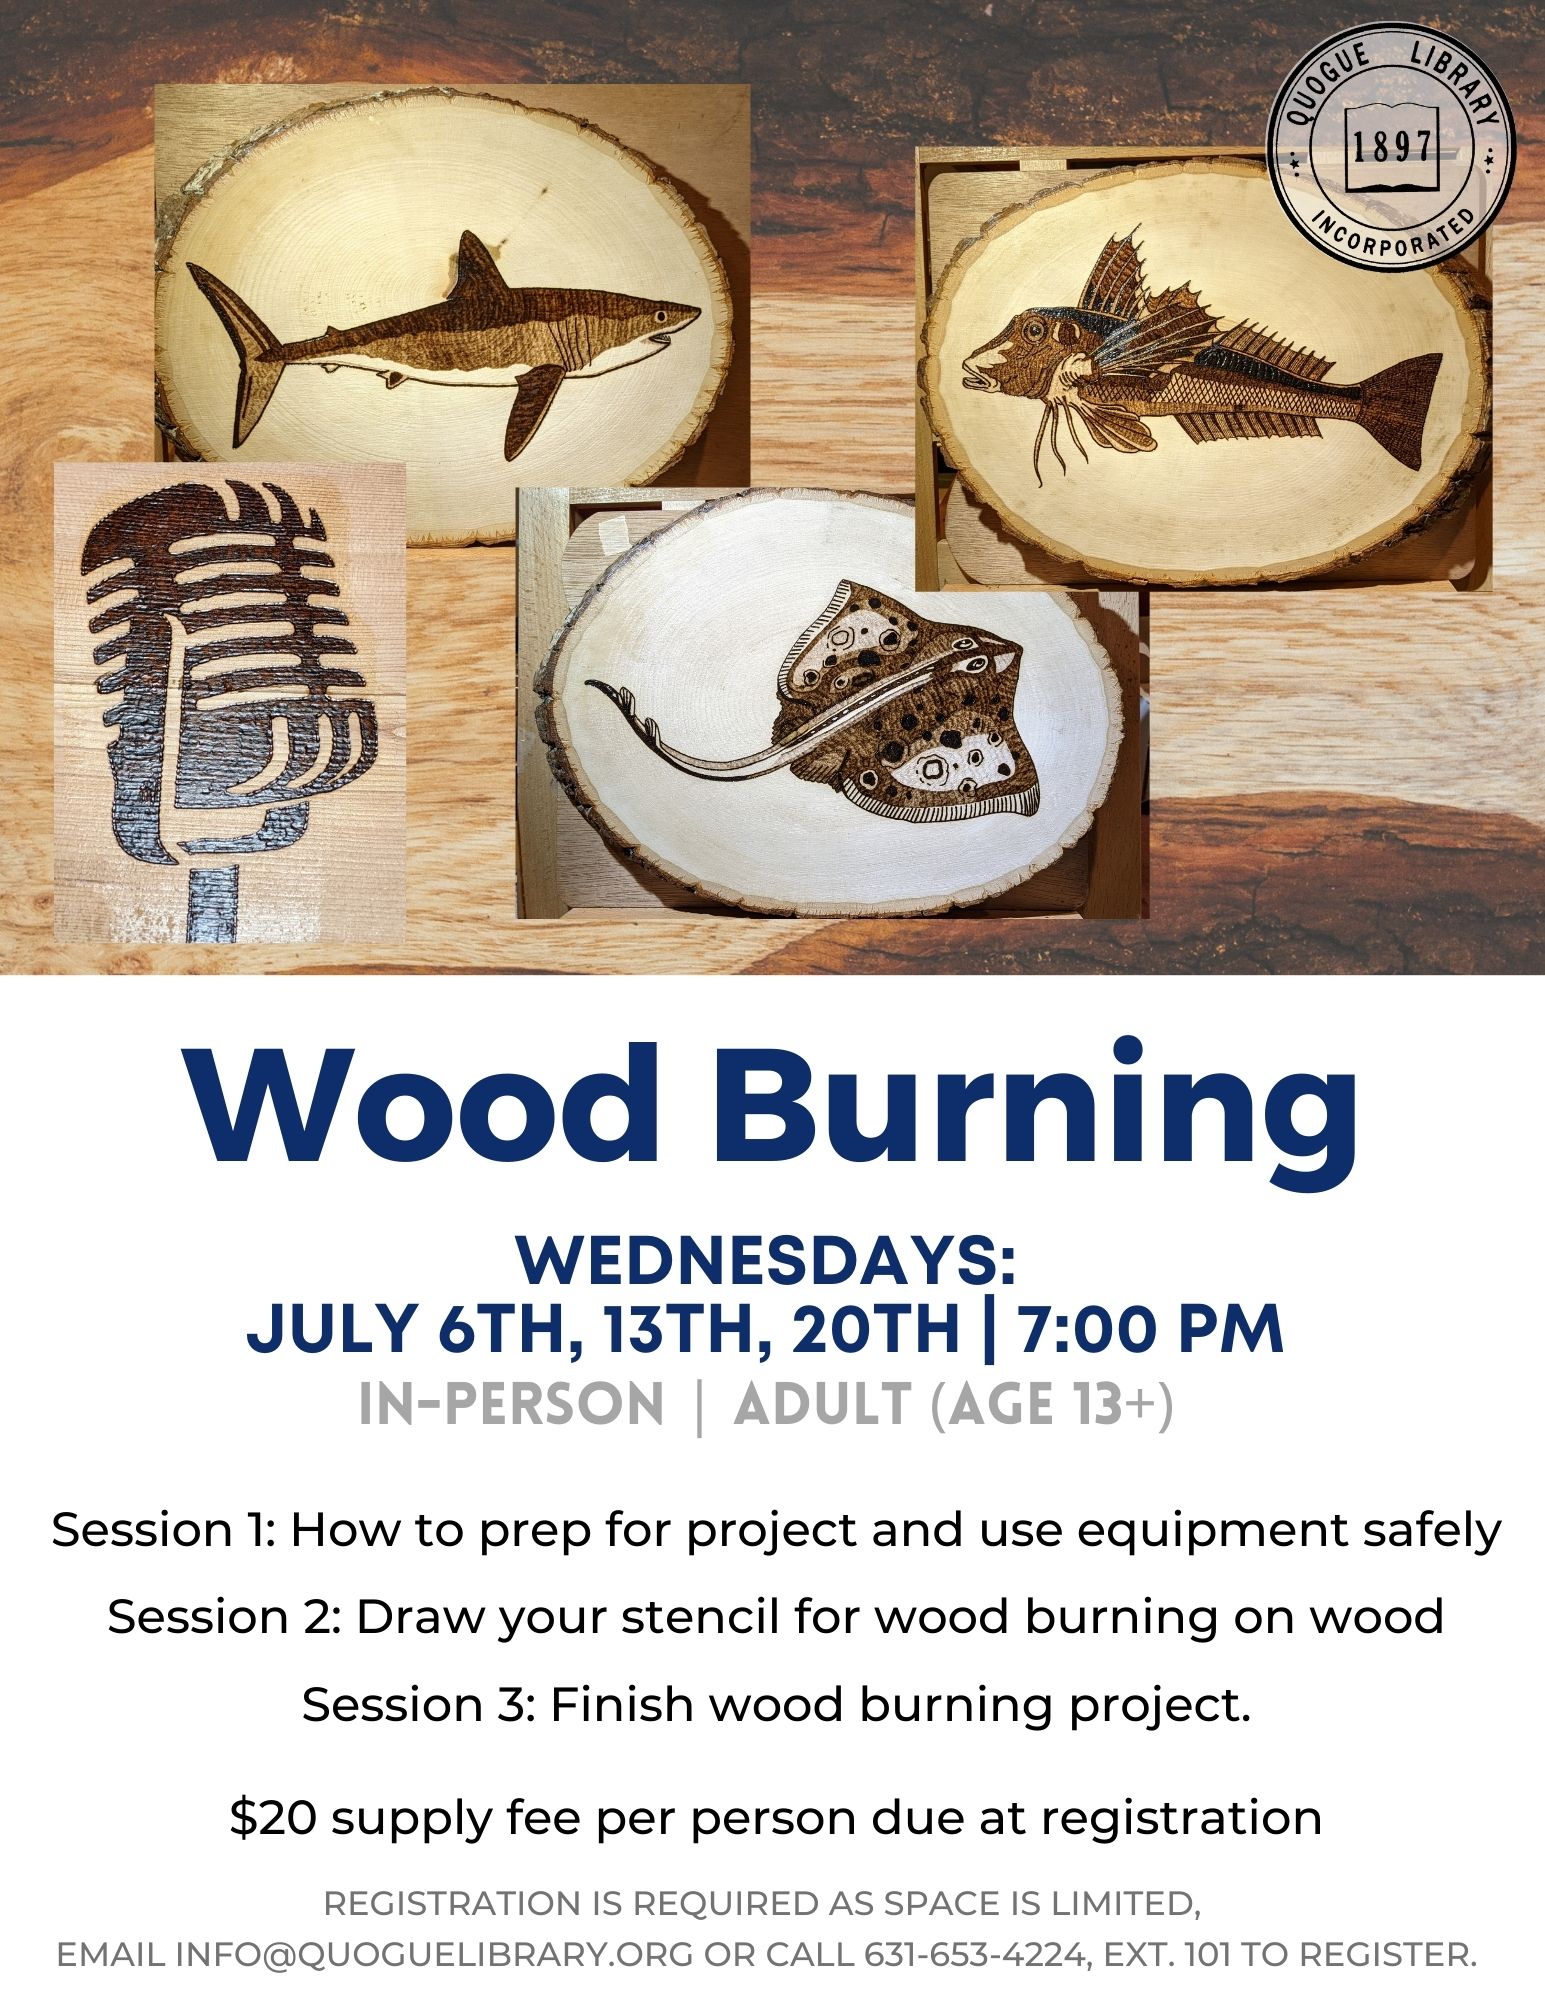 Wood Burning Series Quogue Library